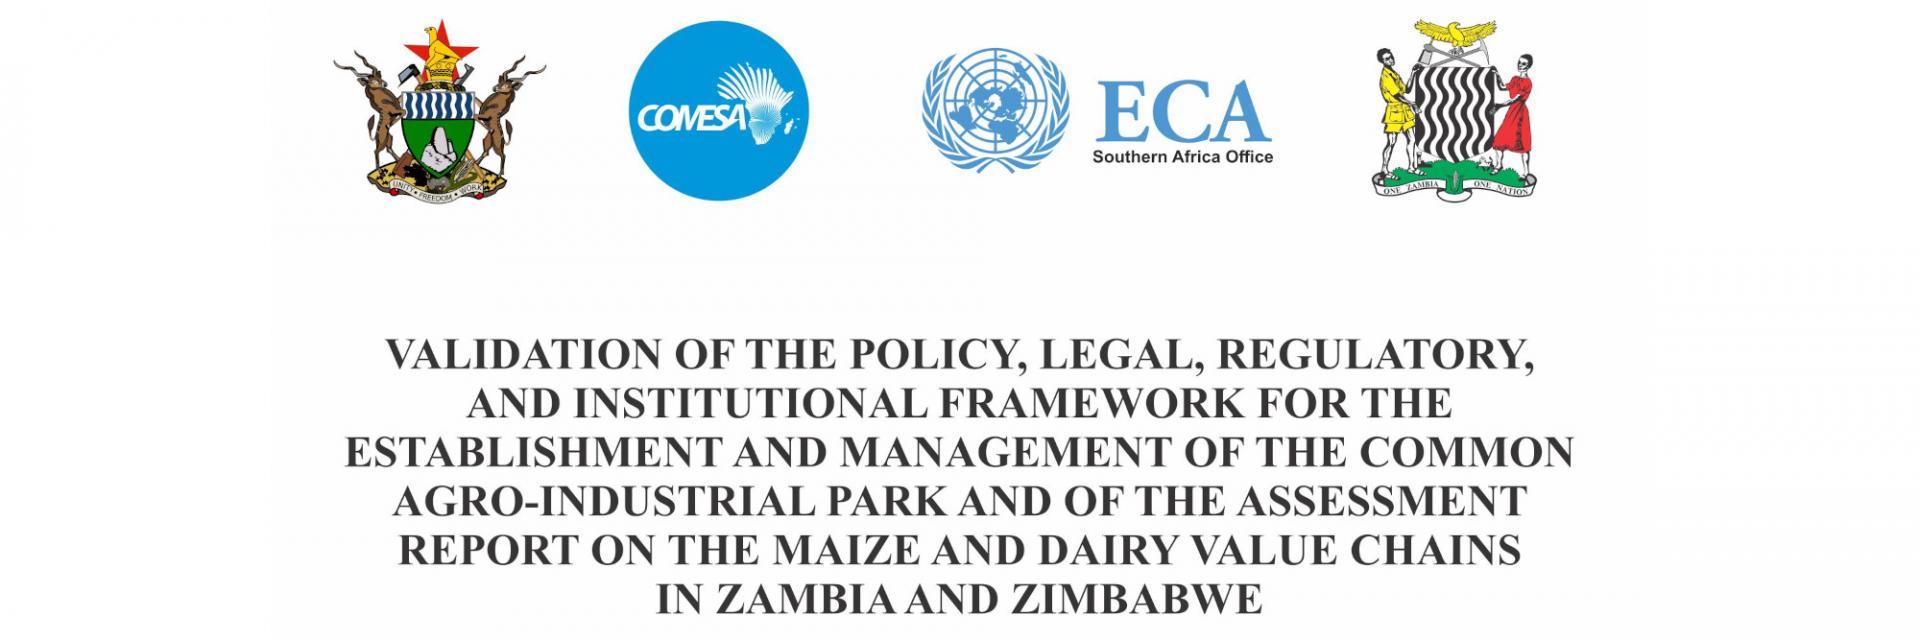 Validation of the policy, legal, regulatory, and institutional framework for the establishment and management of the common agro-industrial park and of the assessment report on the maize and dairy value chains in Zambia and Zimbabwe